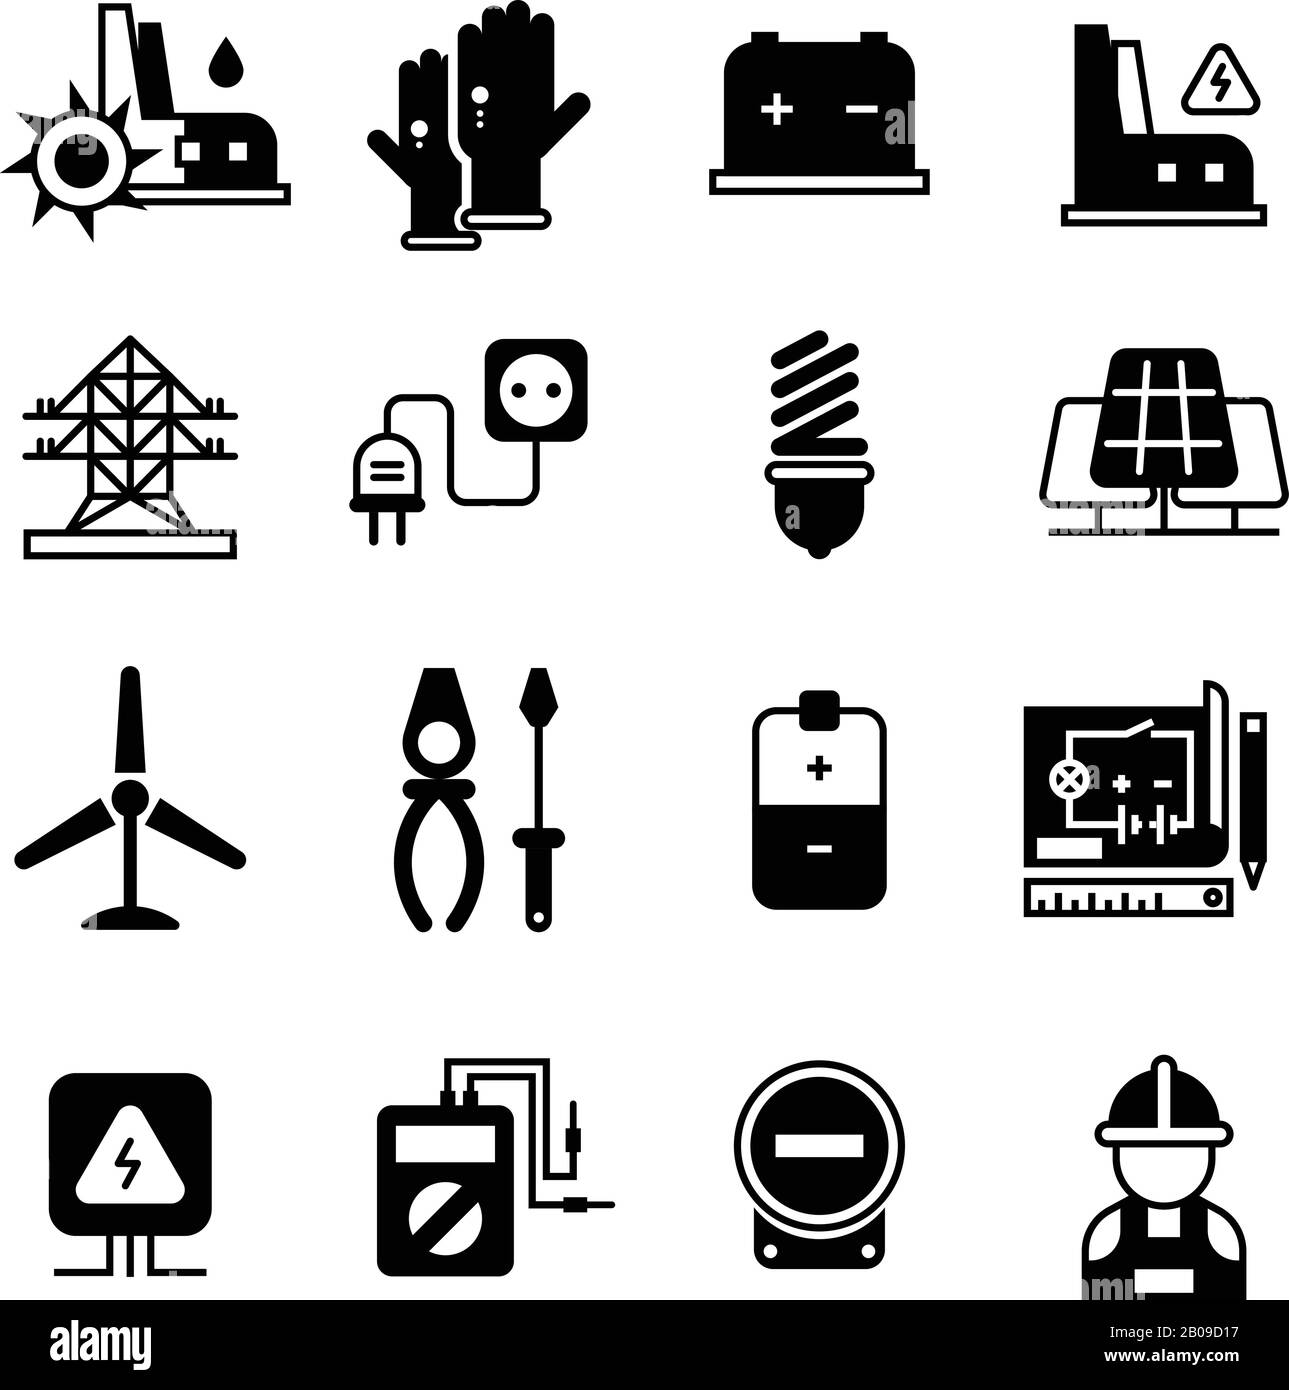 Electric power plant, electricity, electronic tools vector icons. Electric industrial signs set, illustration of black electric transformer silhouette Stock Vector